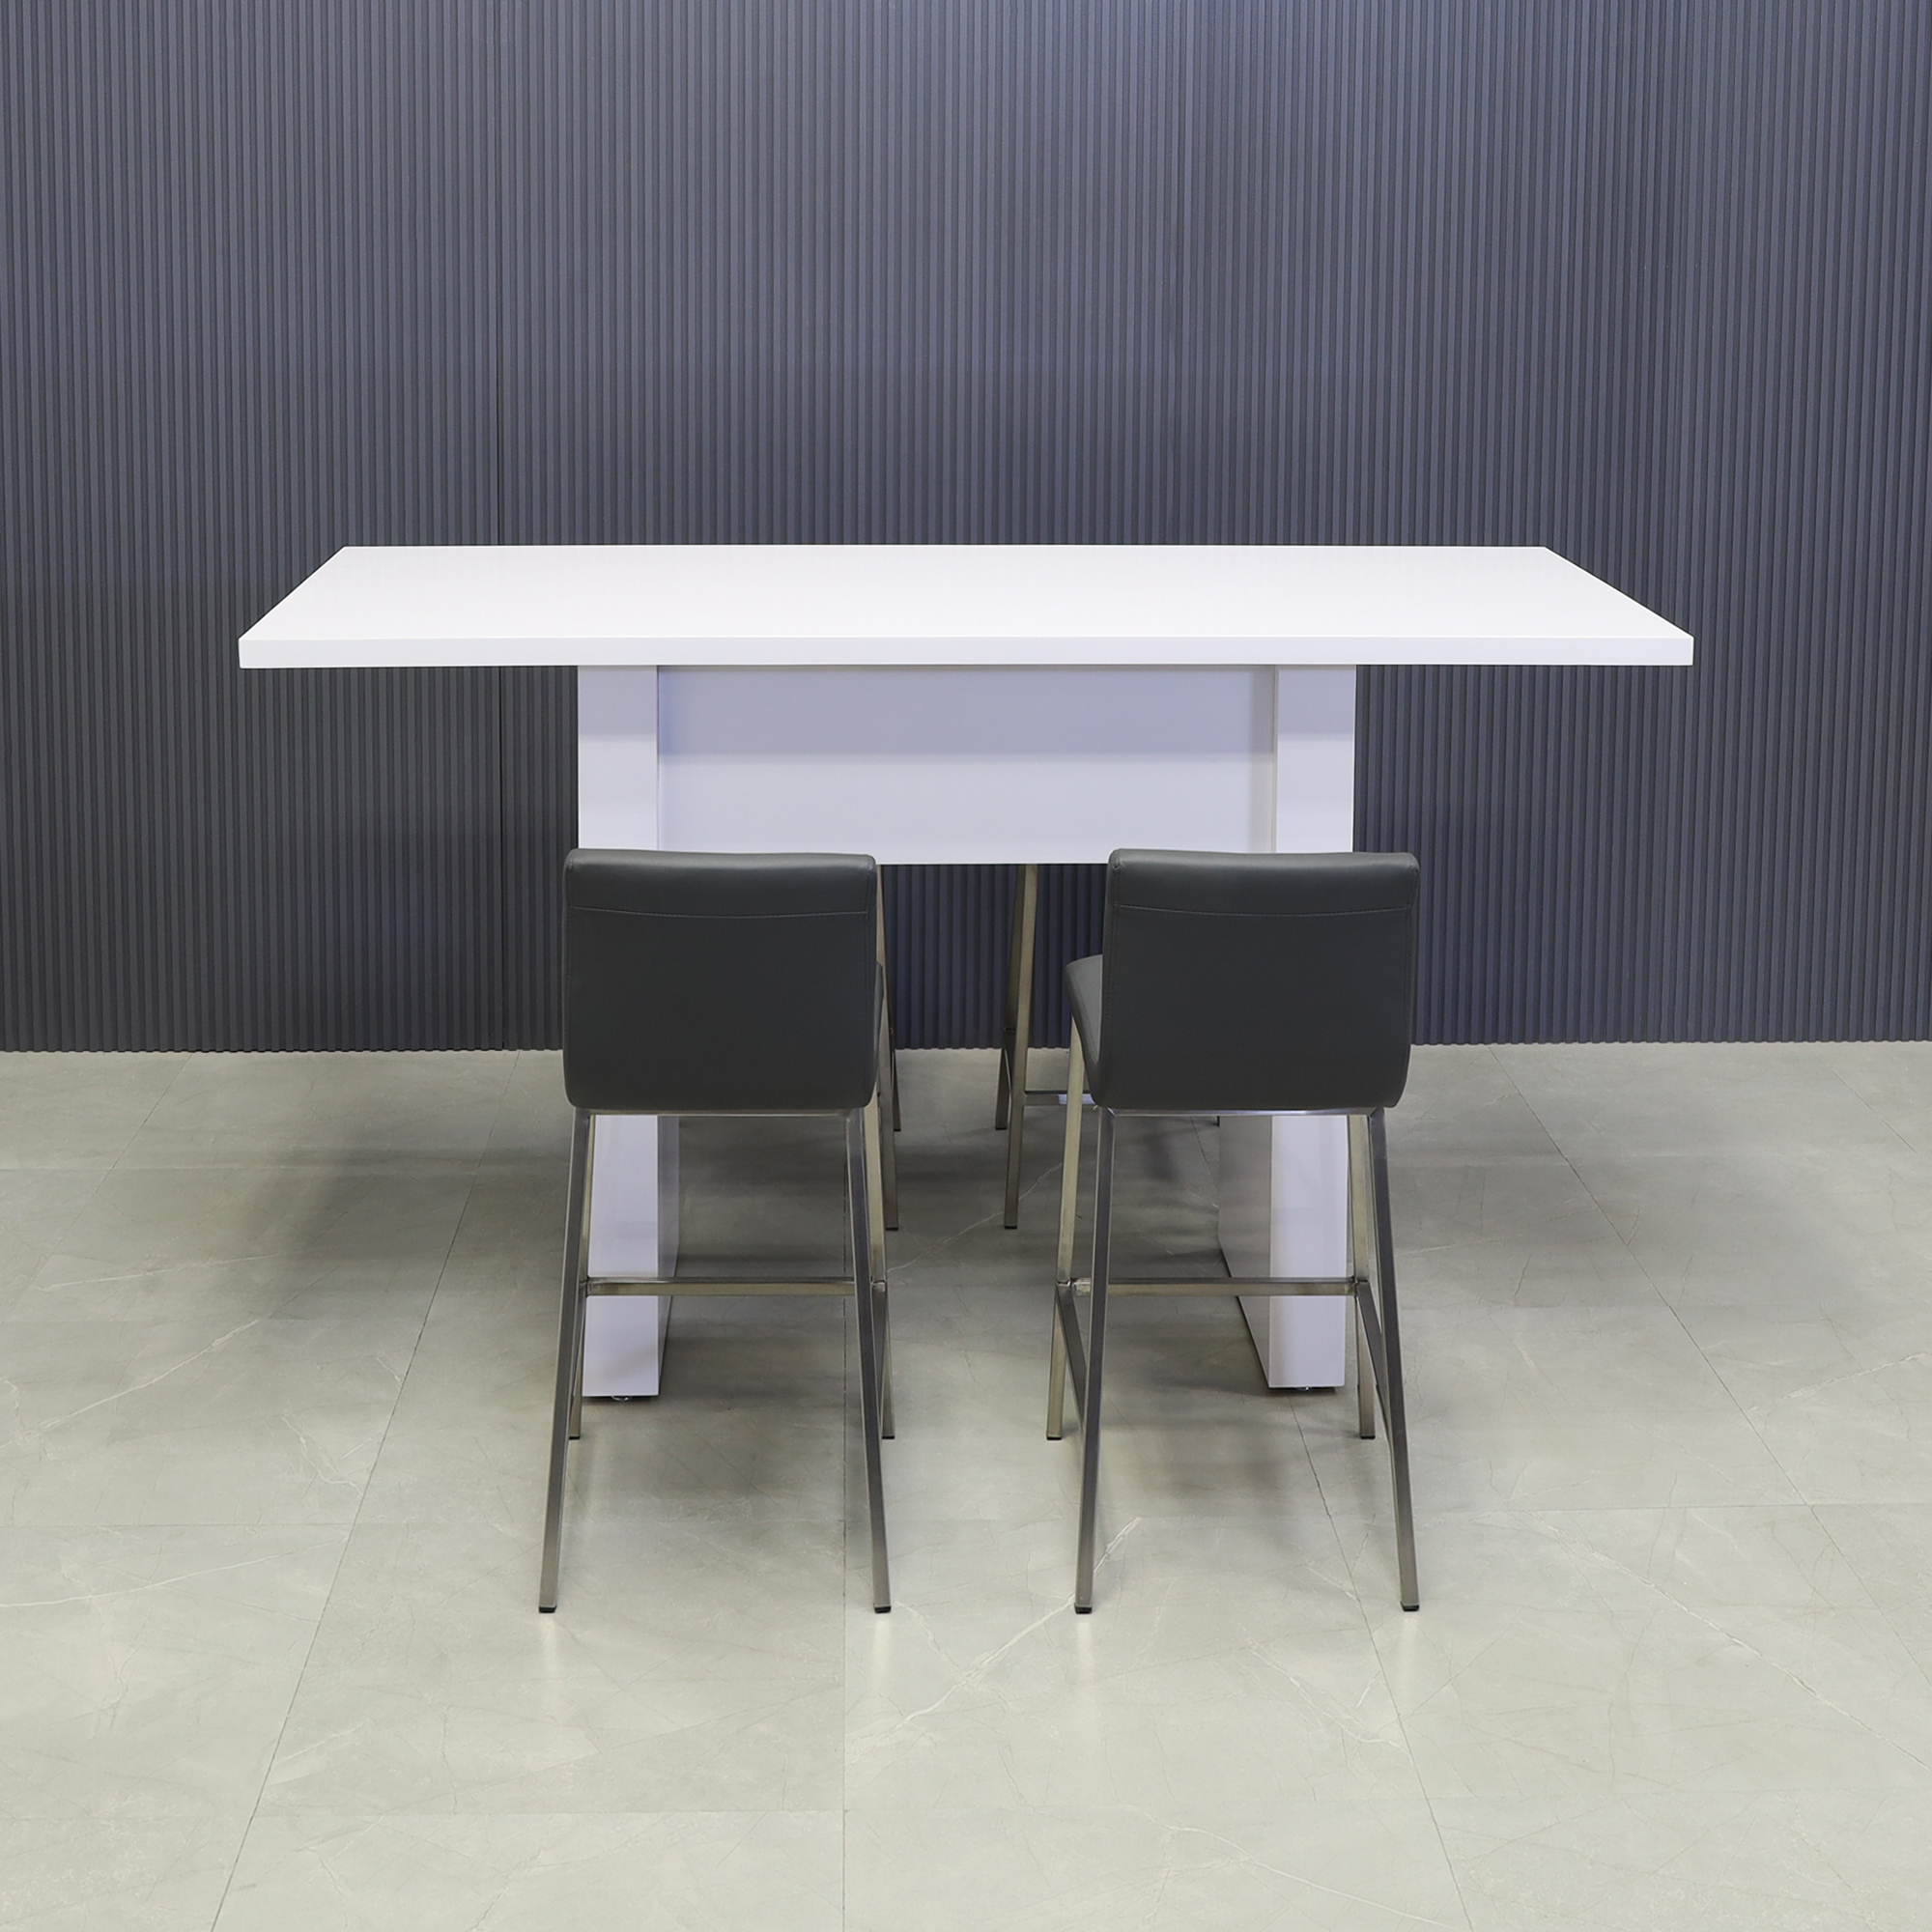 72 inches Windsor Bar Table in white gloss laminate top and base shown here.